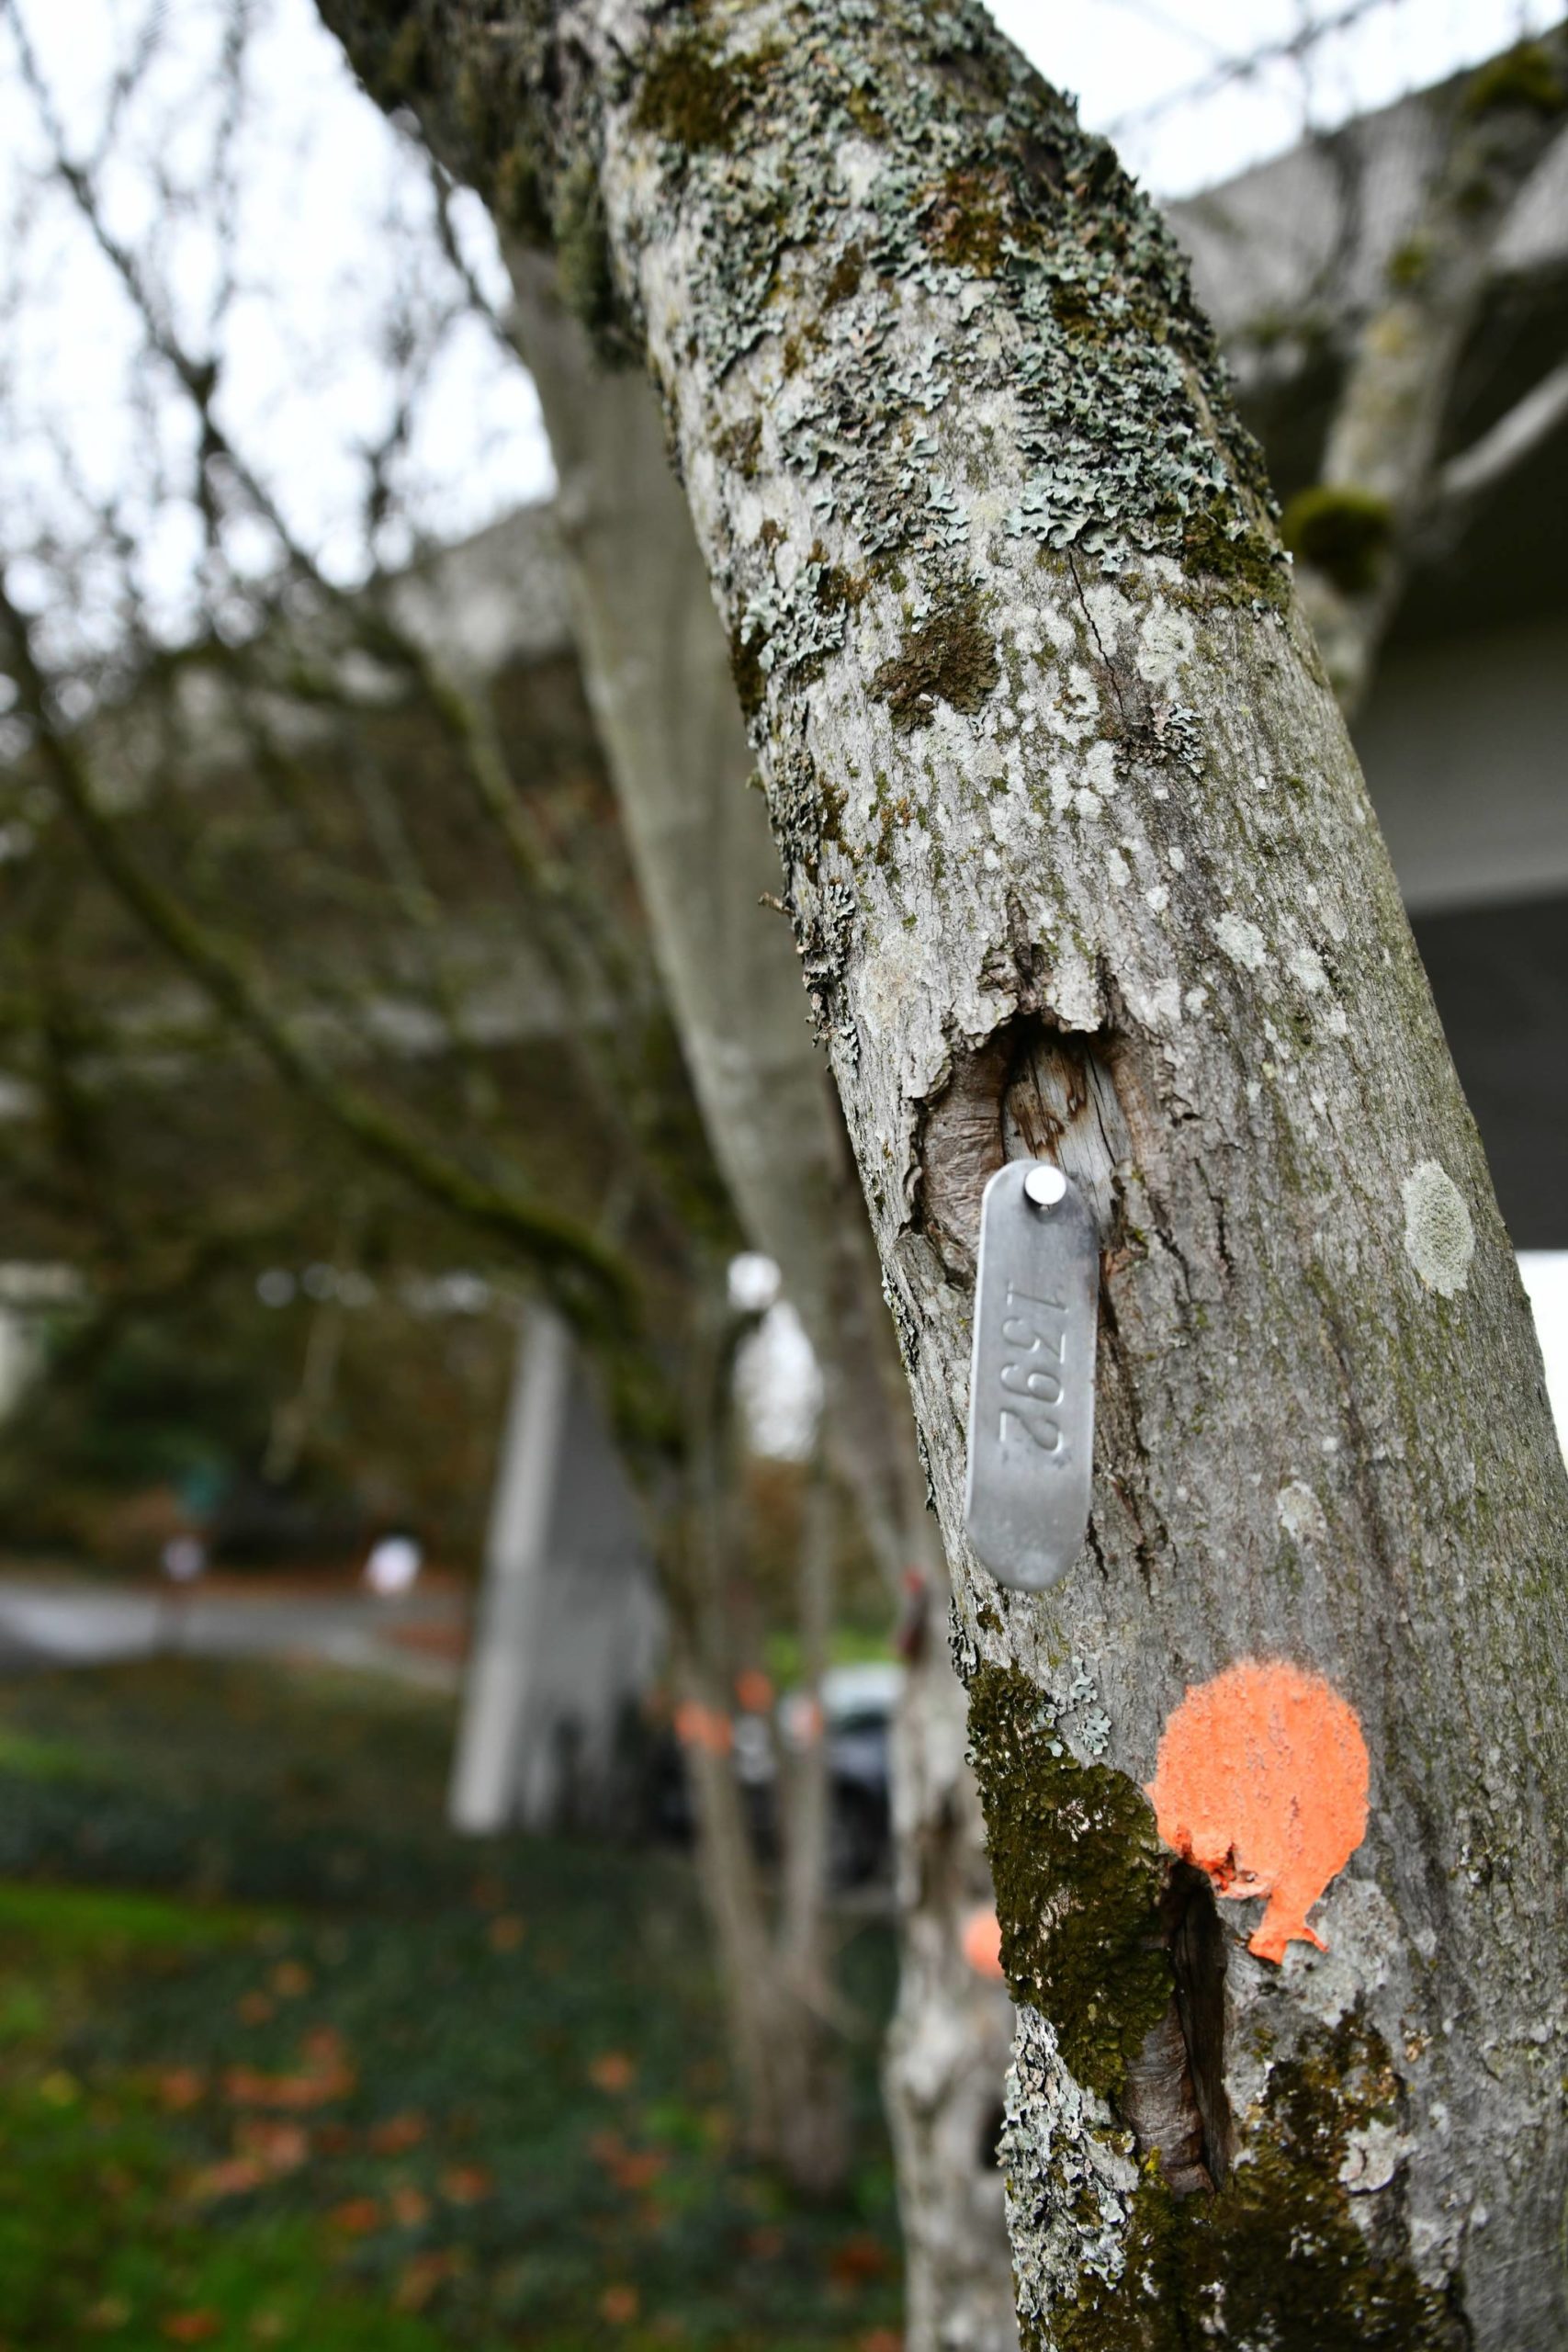 A city tree-risk assessor marked trees for removal along the Aubrey Davis Park corridor. Andy Nystrom/ staff photo